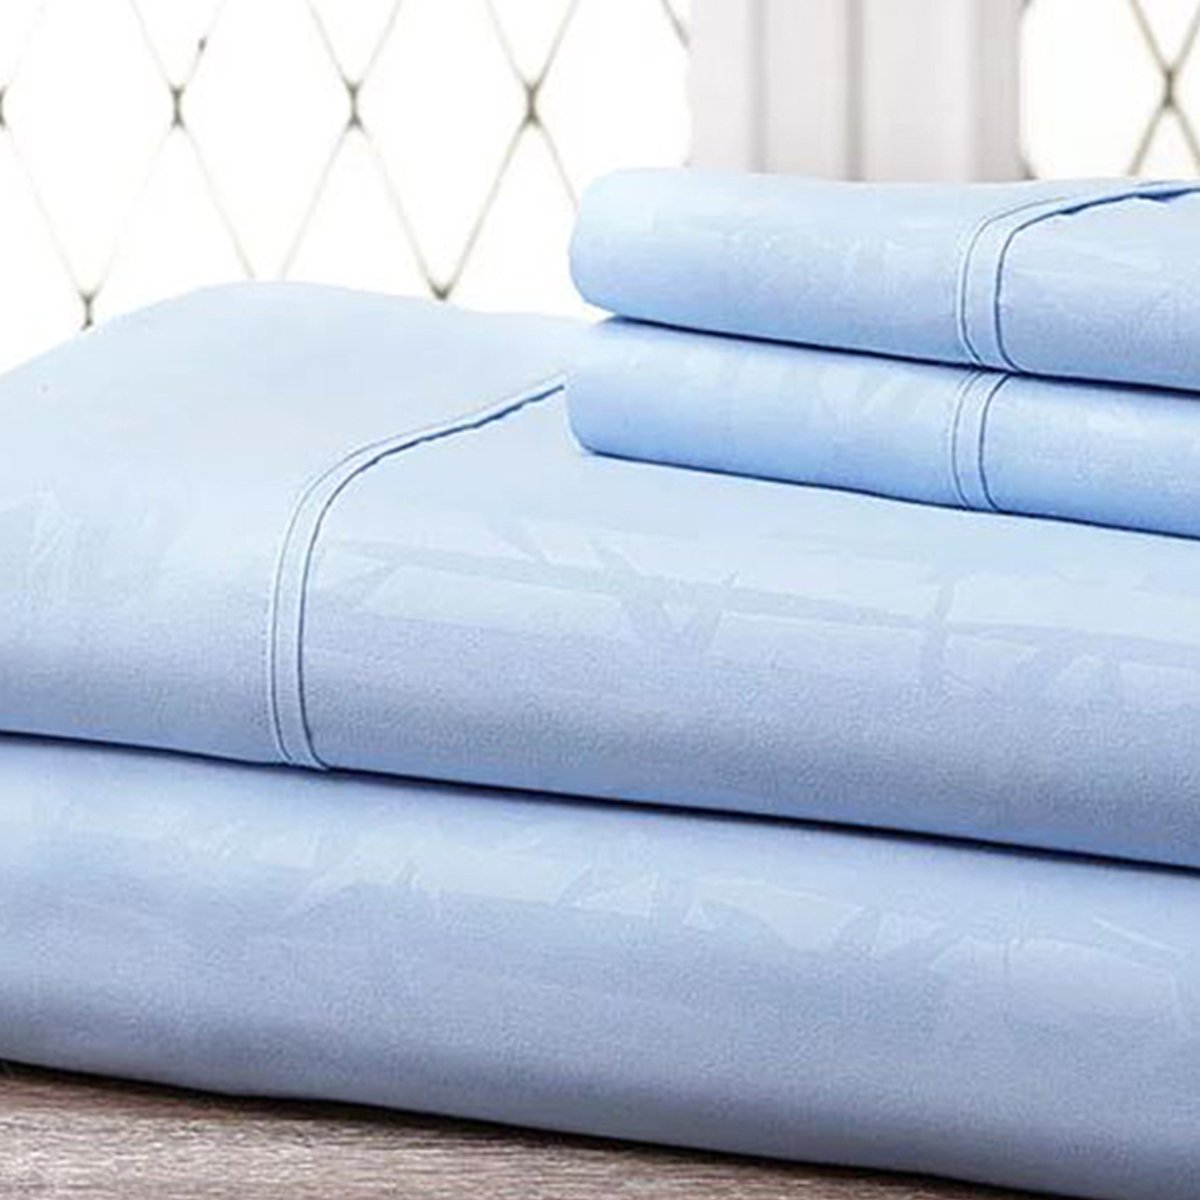 Super-soft 1600 Series Bamboo Embossed Bed Sheet, Light Blue - Full, 4 Piece